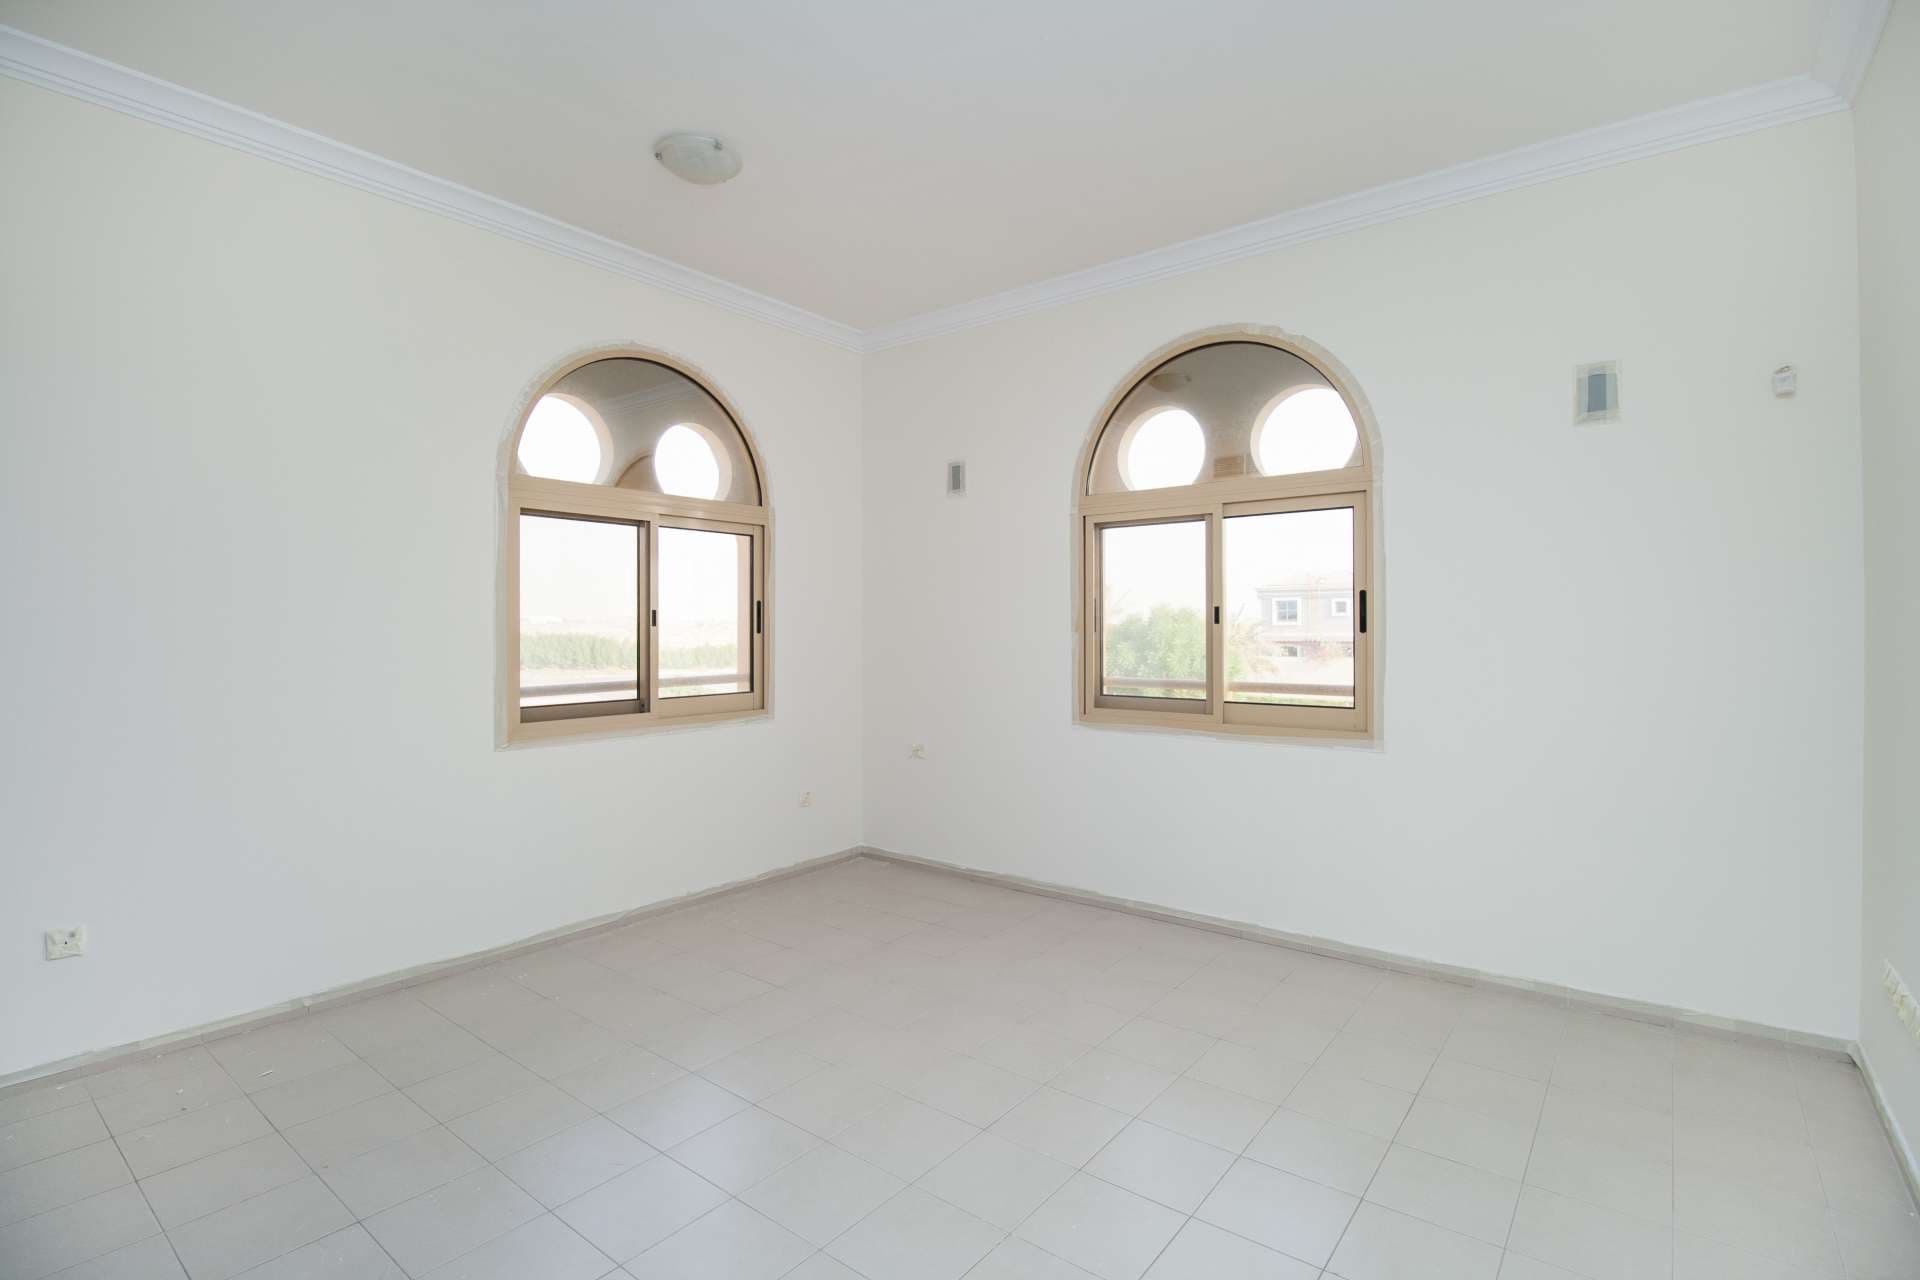 3 Bedroom Townhouse For Rent Western Residence South Lp04842 2cf49eced7aed600.jpg